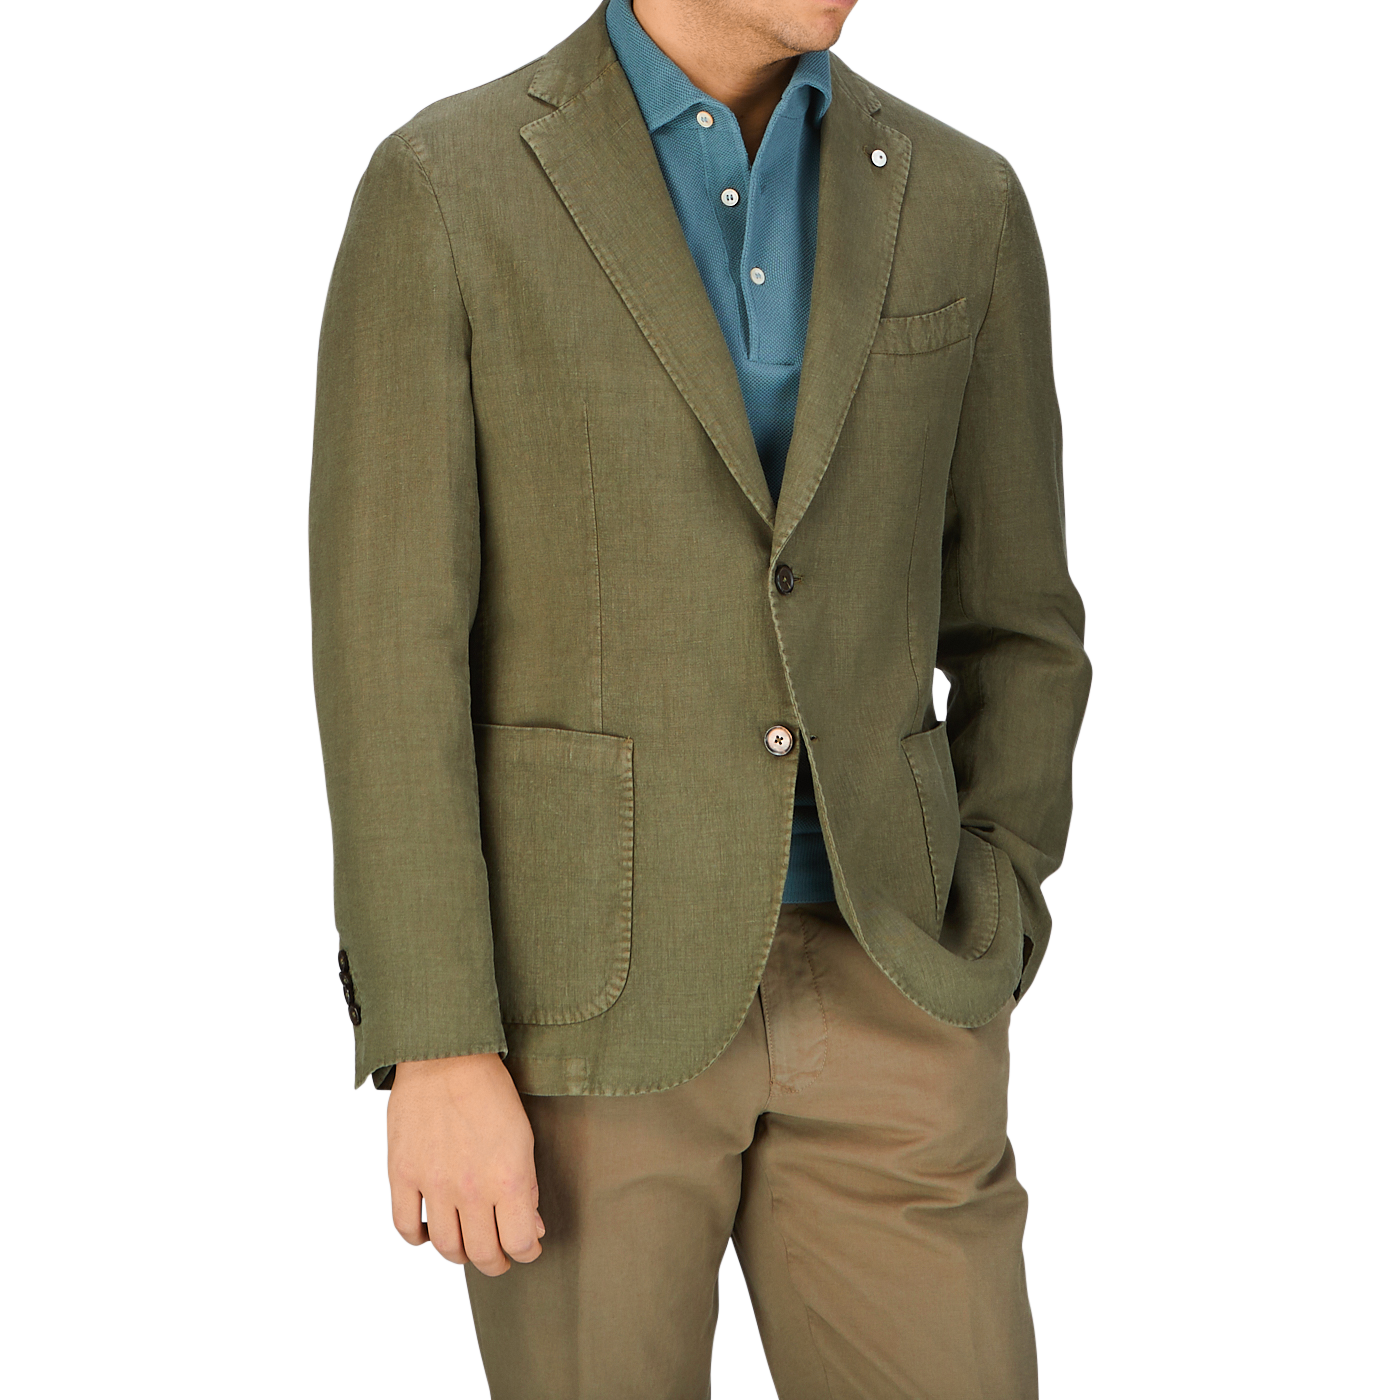 Man wearing a Grass Green Washed Linen Blazer from L.B.M. 1911, blue shirt, and beige pants from Italy.